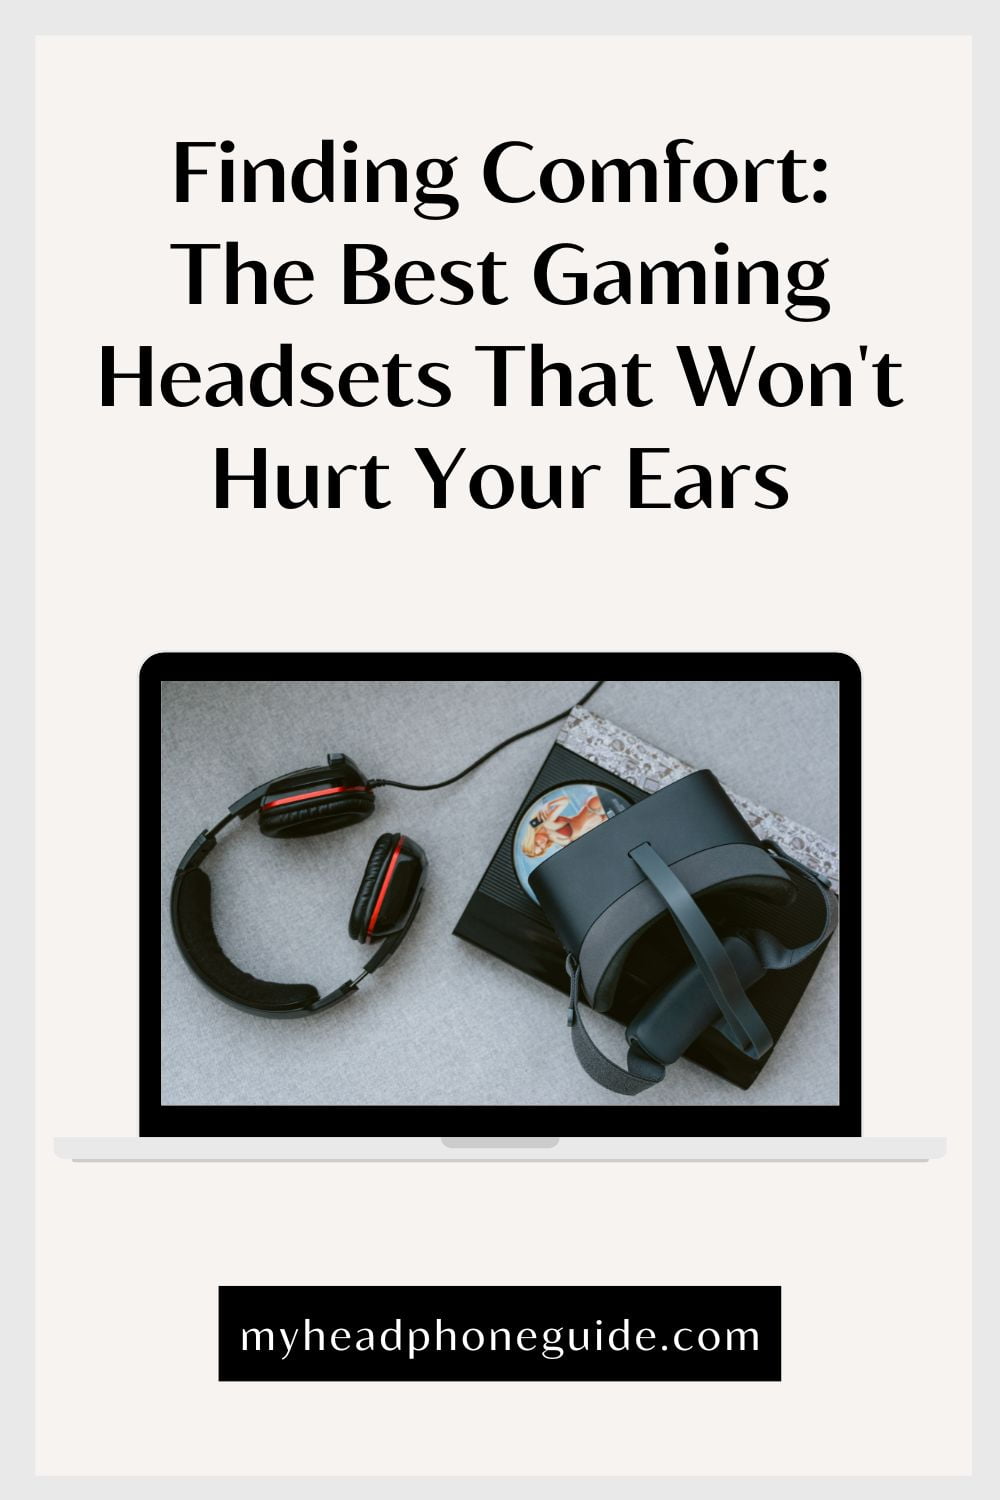 Best Gaming Headsets That Won't Hurt Your Ears